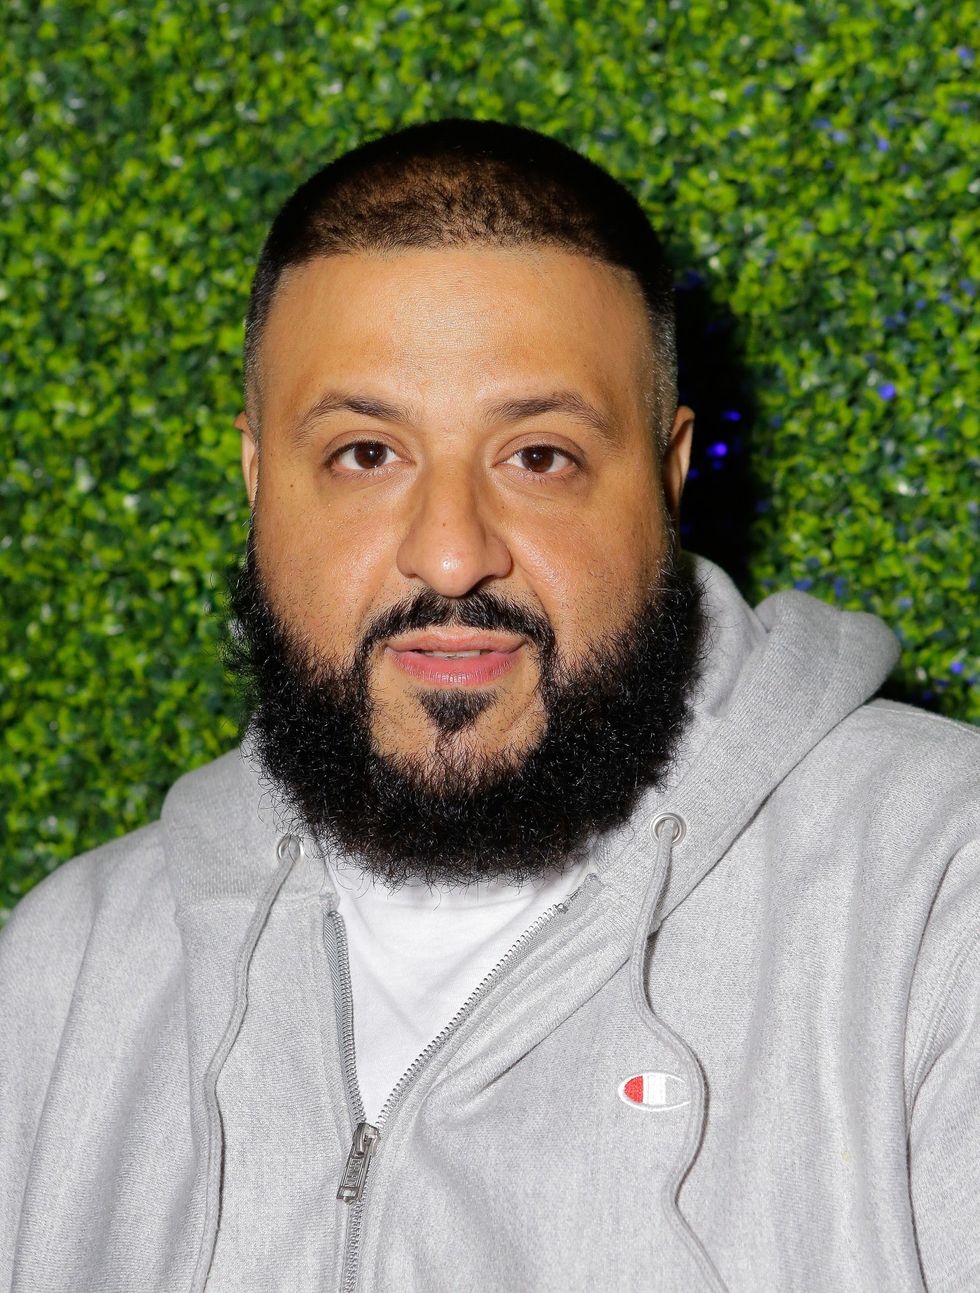 DJ Khaled’s Father Of Asahd Is This Week's No. 1 Album